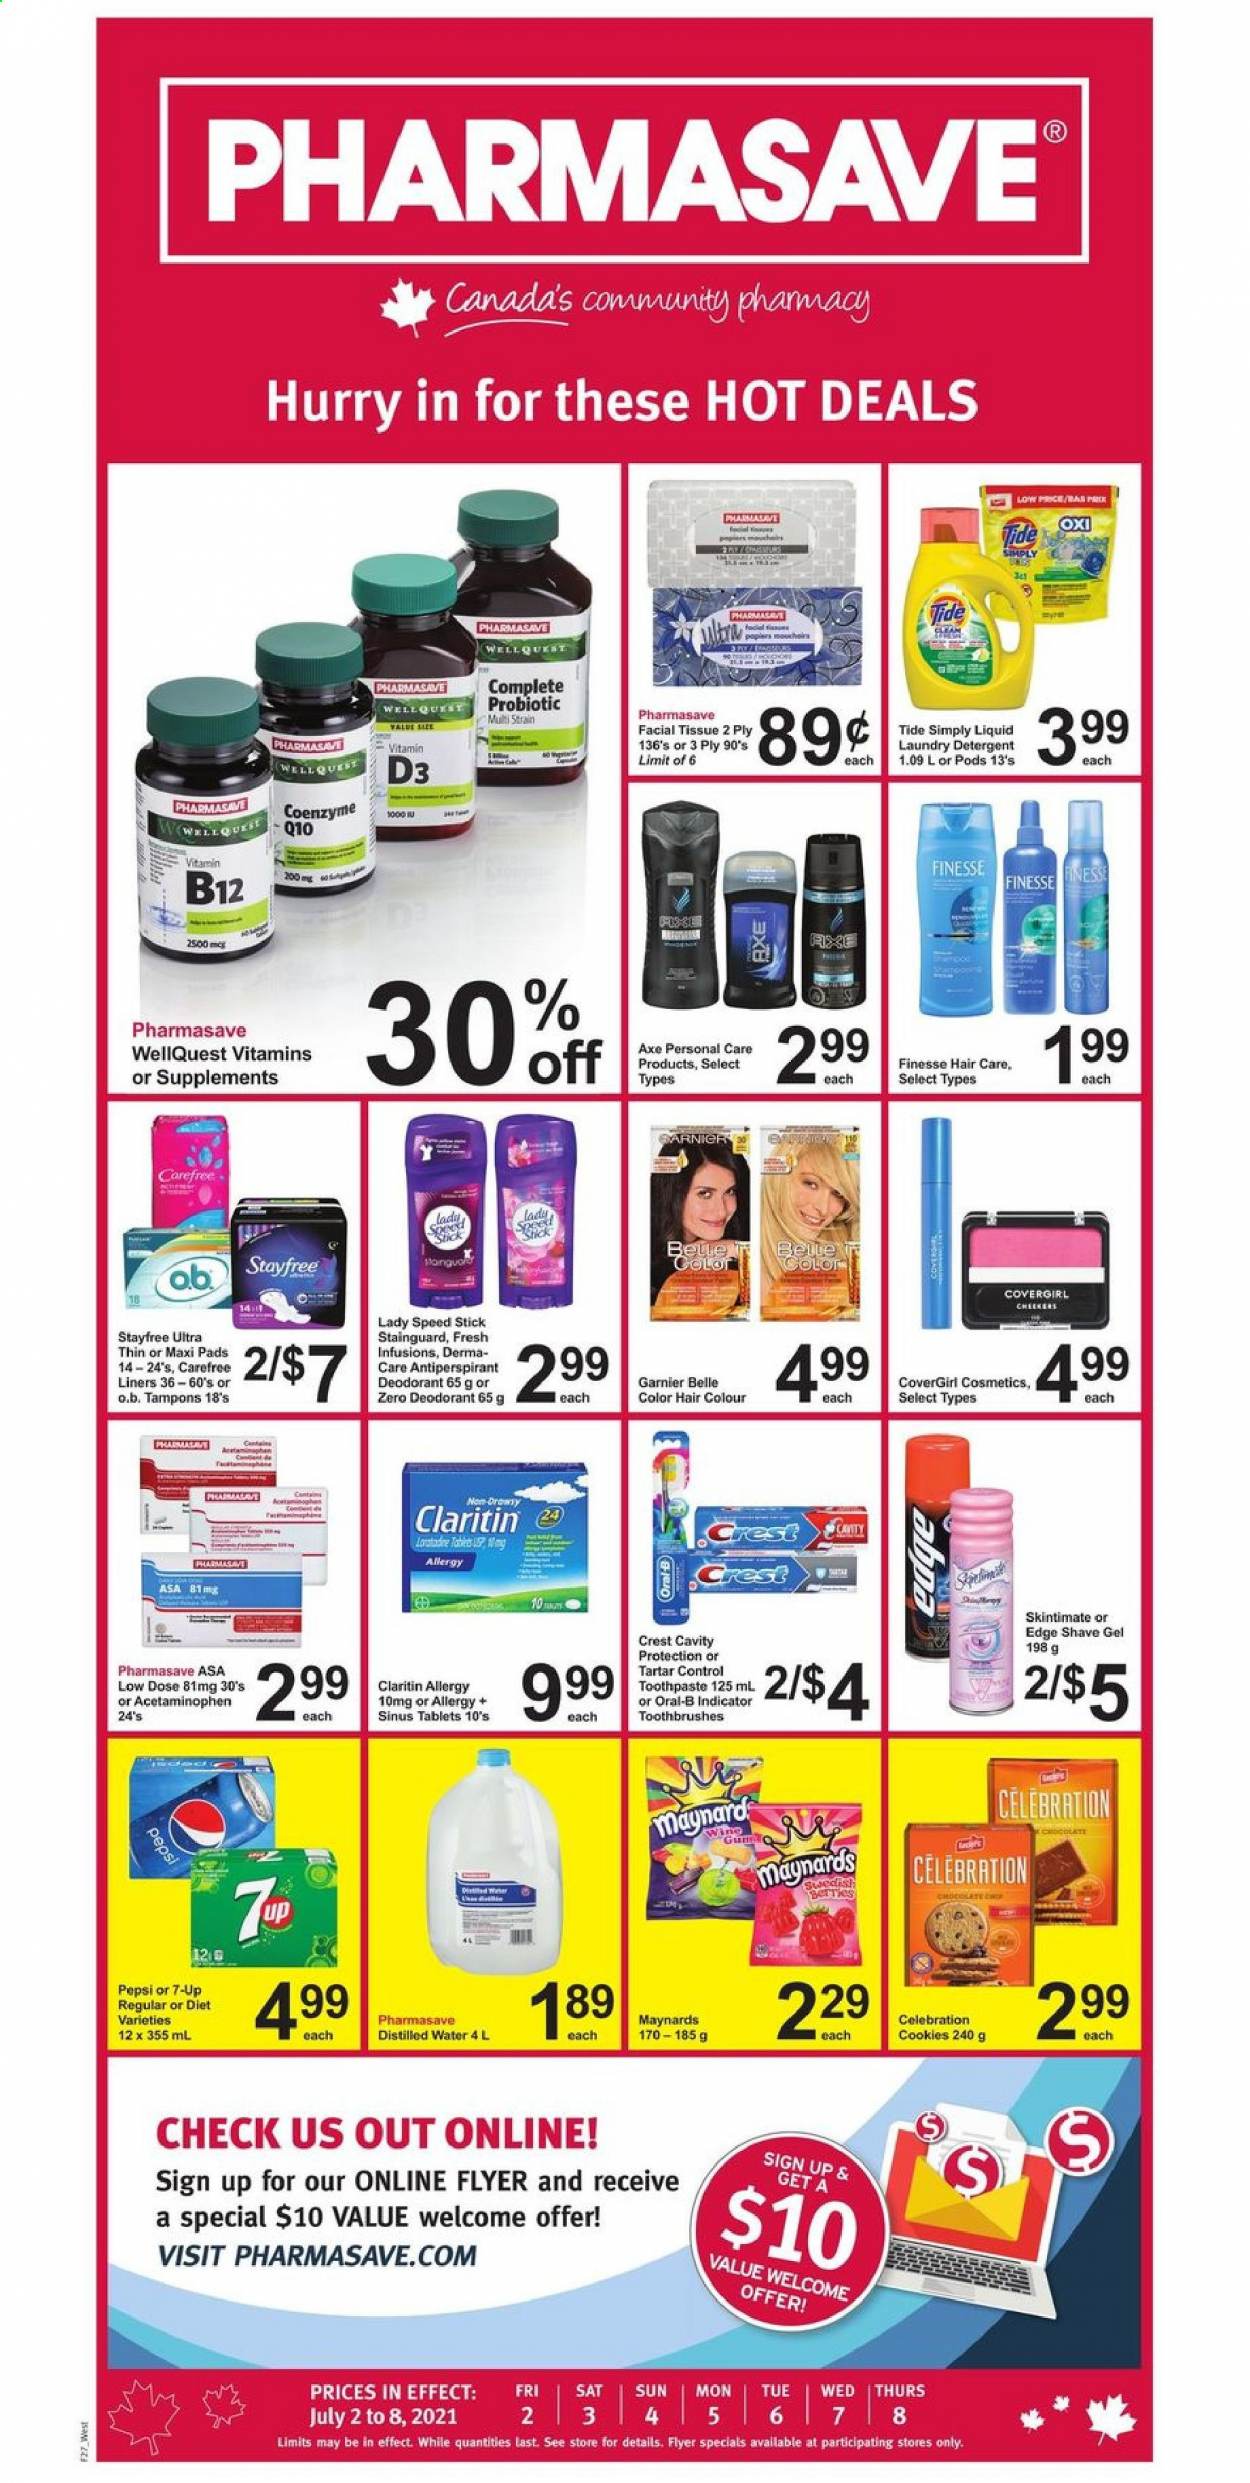 thumbnail - Pharmasave Flyer - July 02, 2021 - July 08, 2021 - Sales products - cookies, Celebration, Pepsi, 7UP, L'Or, tissues, Tide, laundry detergent, toothpaste, Crest, Stayfree, sanitary pads, Carefree, tampons, hair color, anti-perspirant, Speed Stick, shave gel, vitamin D3, Low Dose, Garnier, Oral-B, deodorant. Page 1.